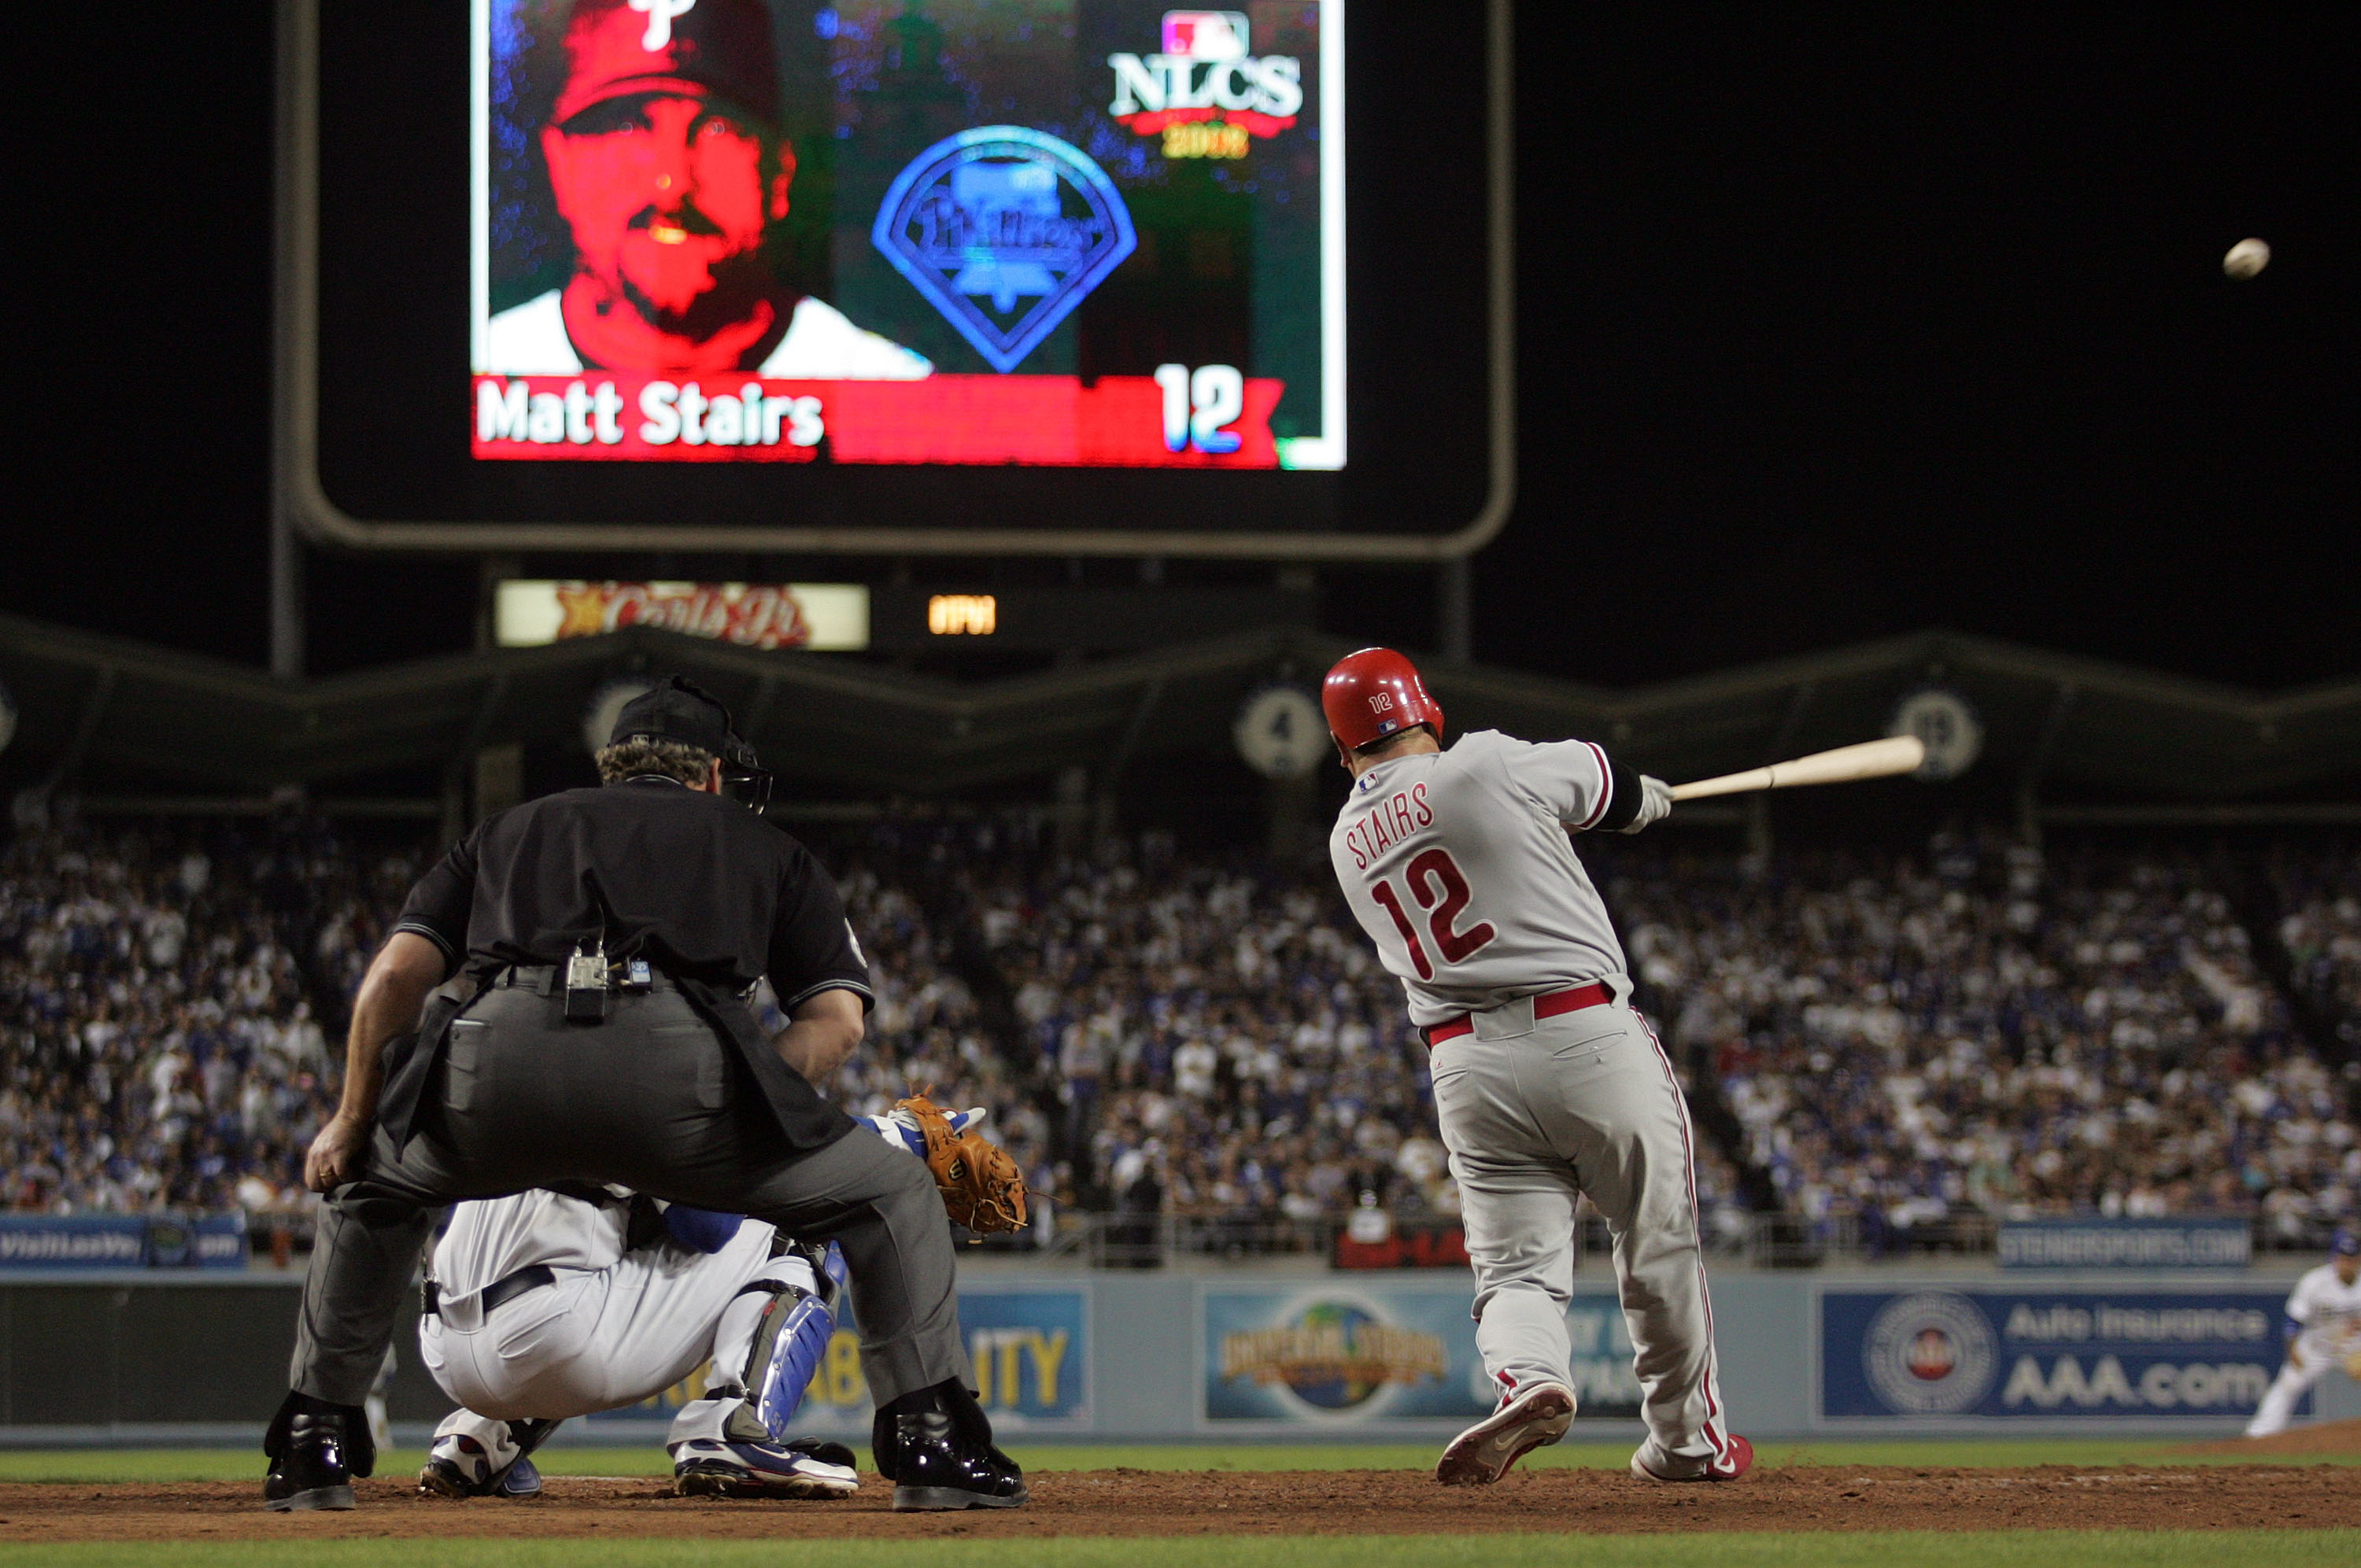 Pat Burrell to throw out first pitch before NLCS Game 4